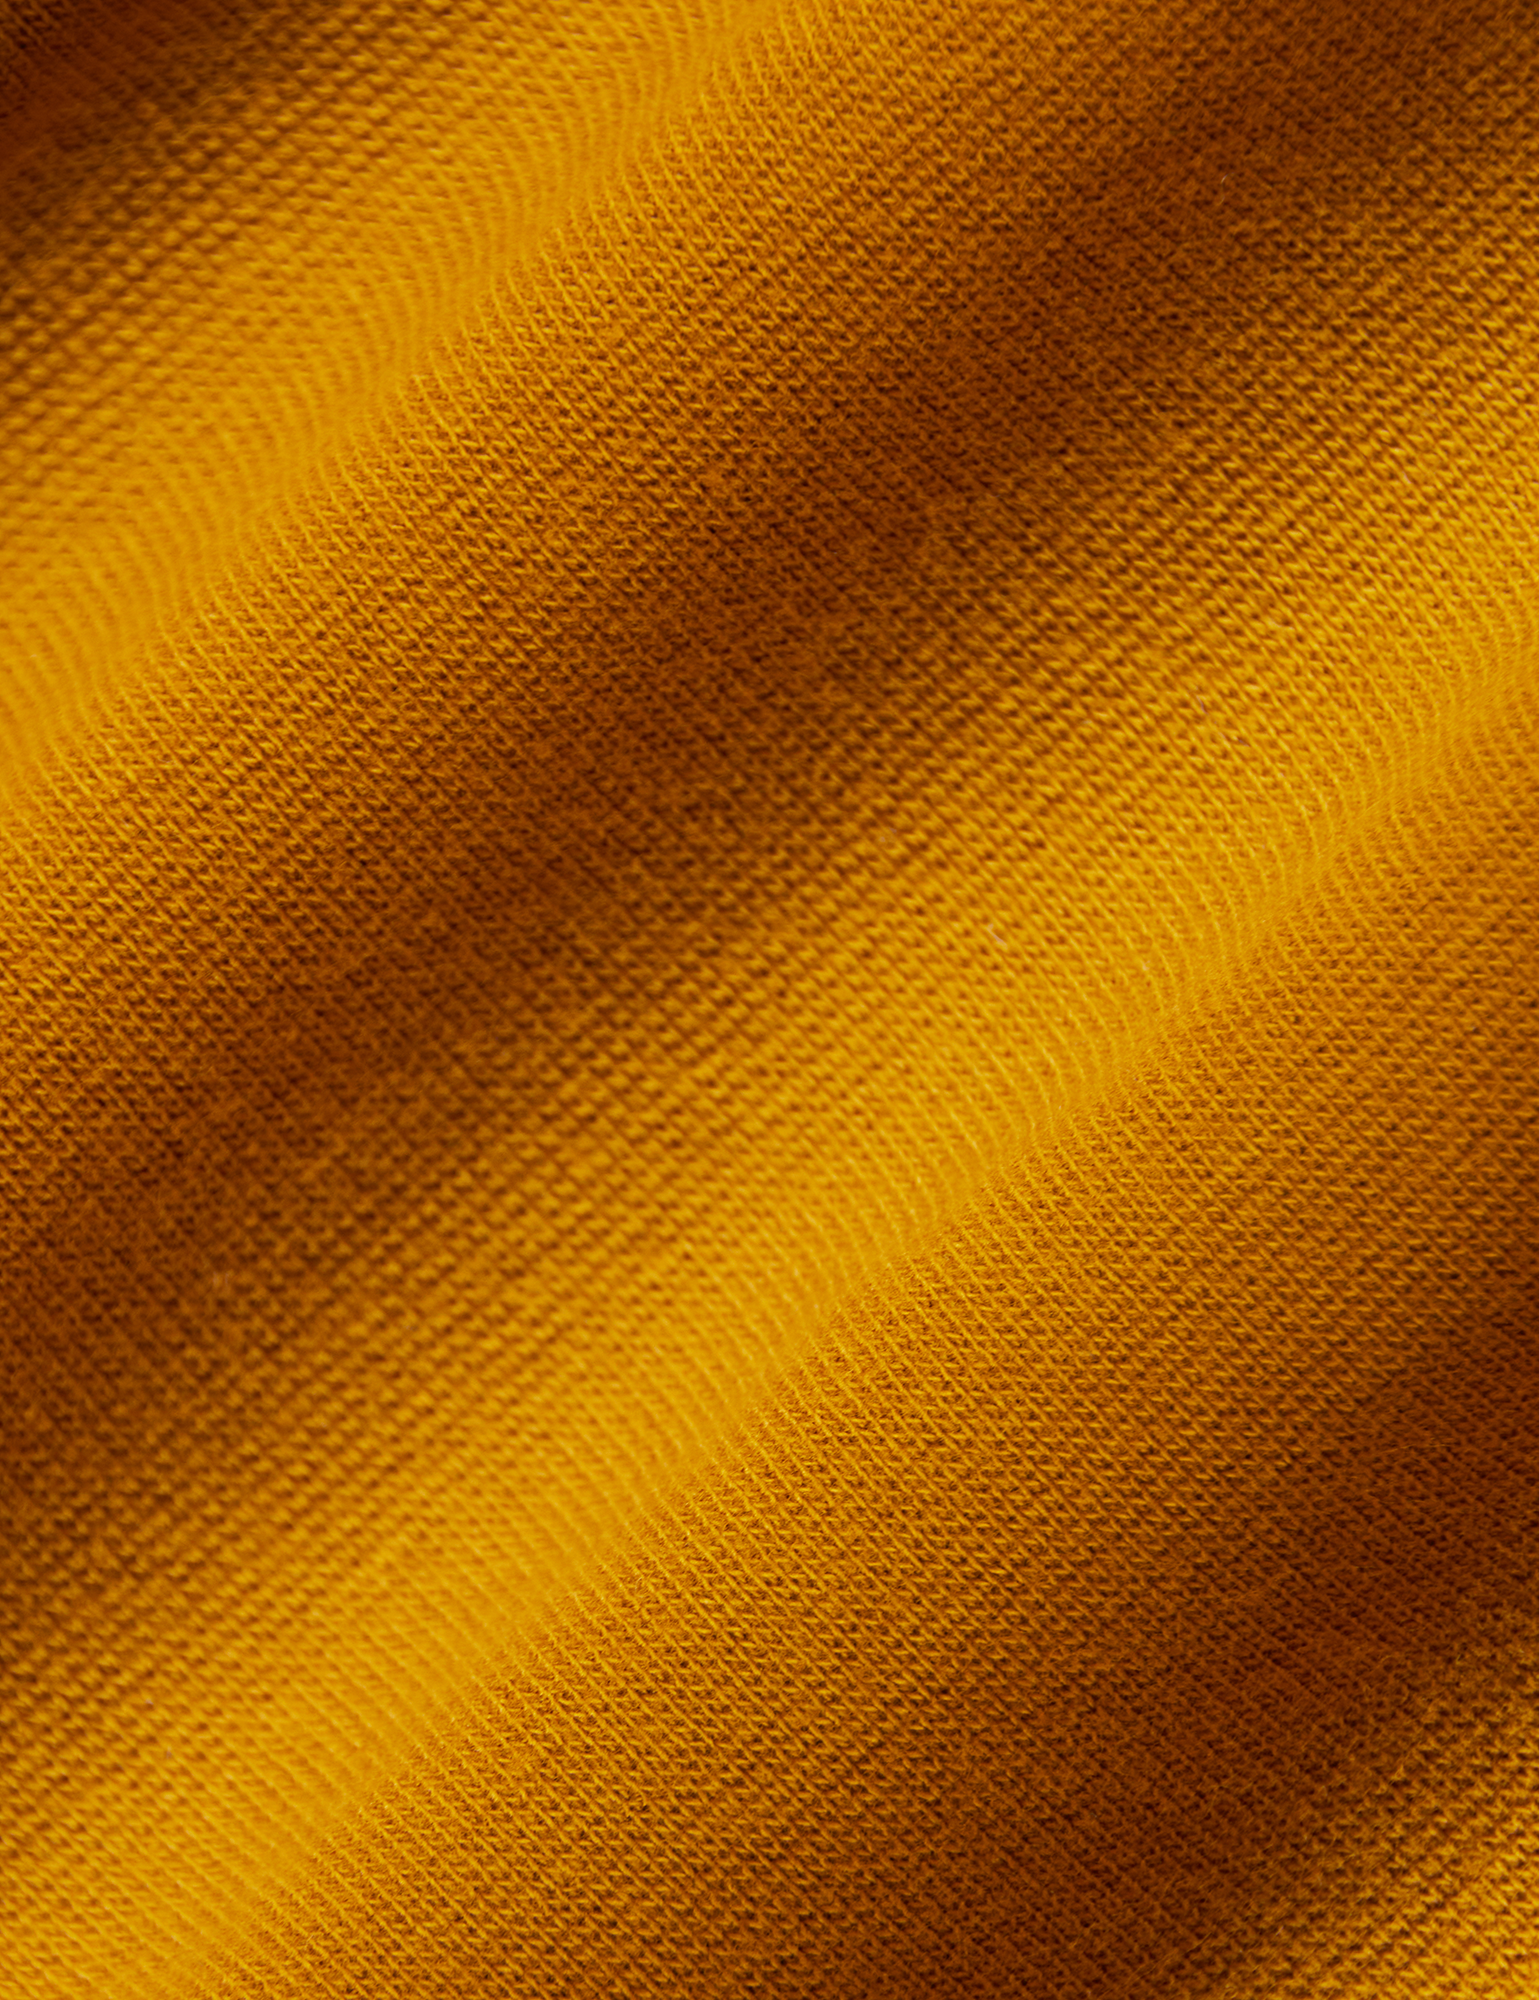 The Tank Top in Spicy Mustard detail close up of fabric